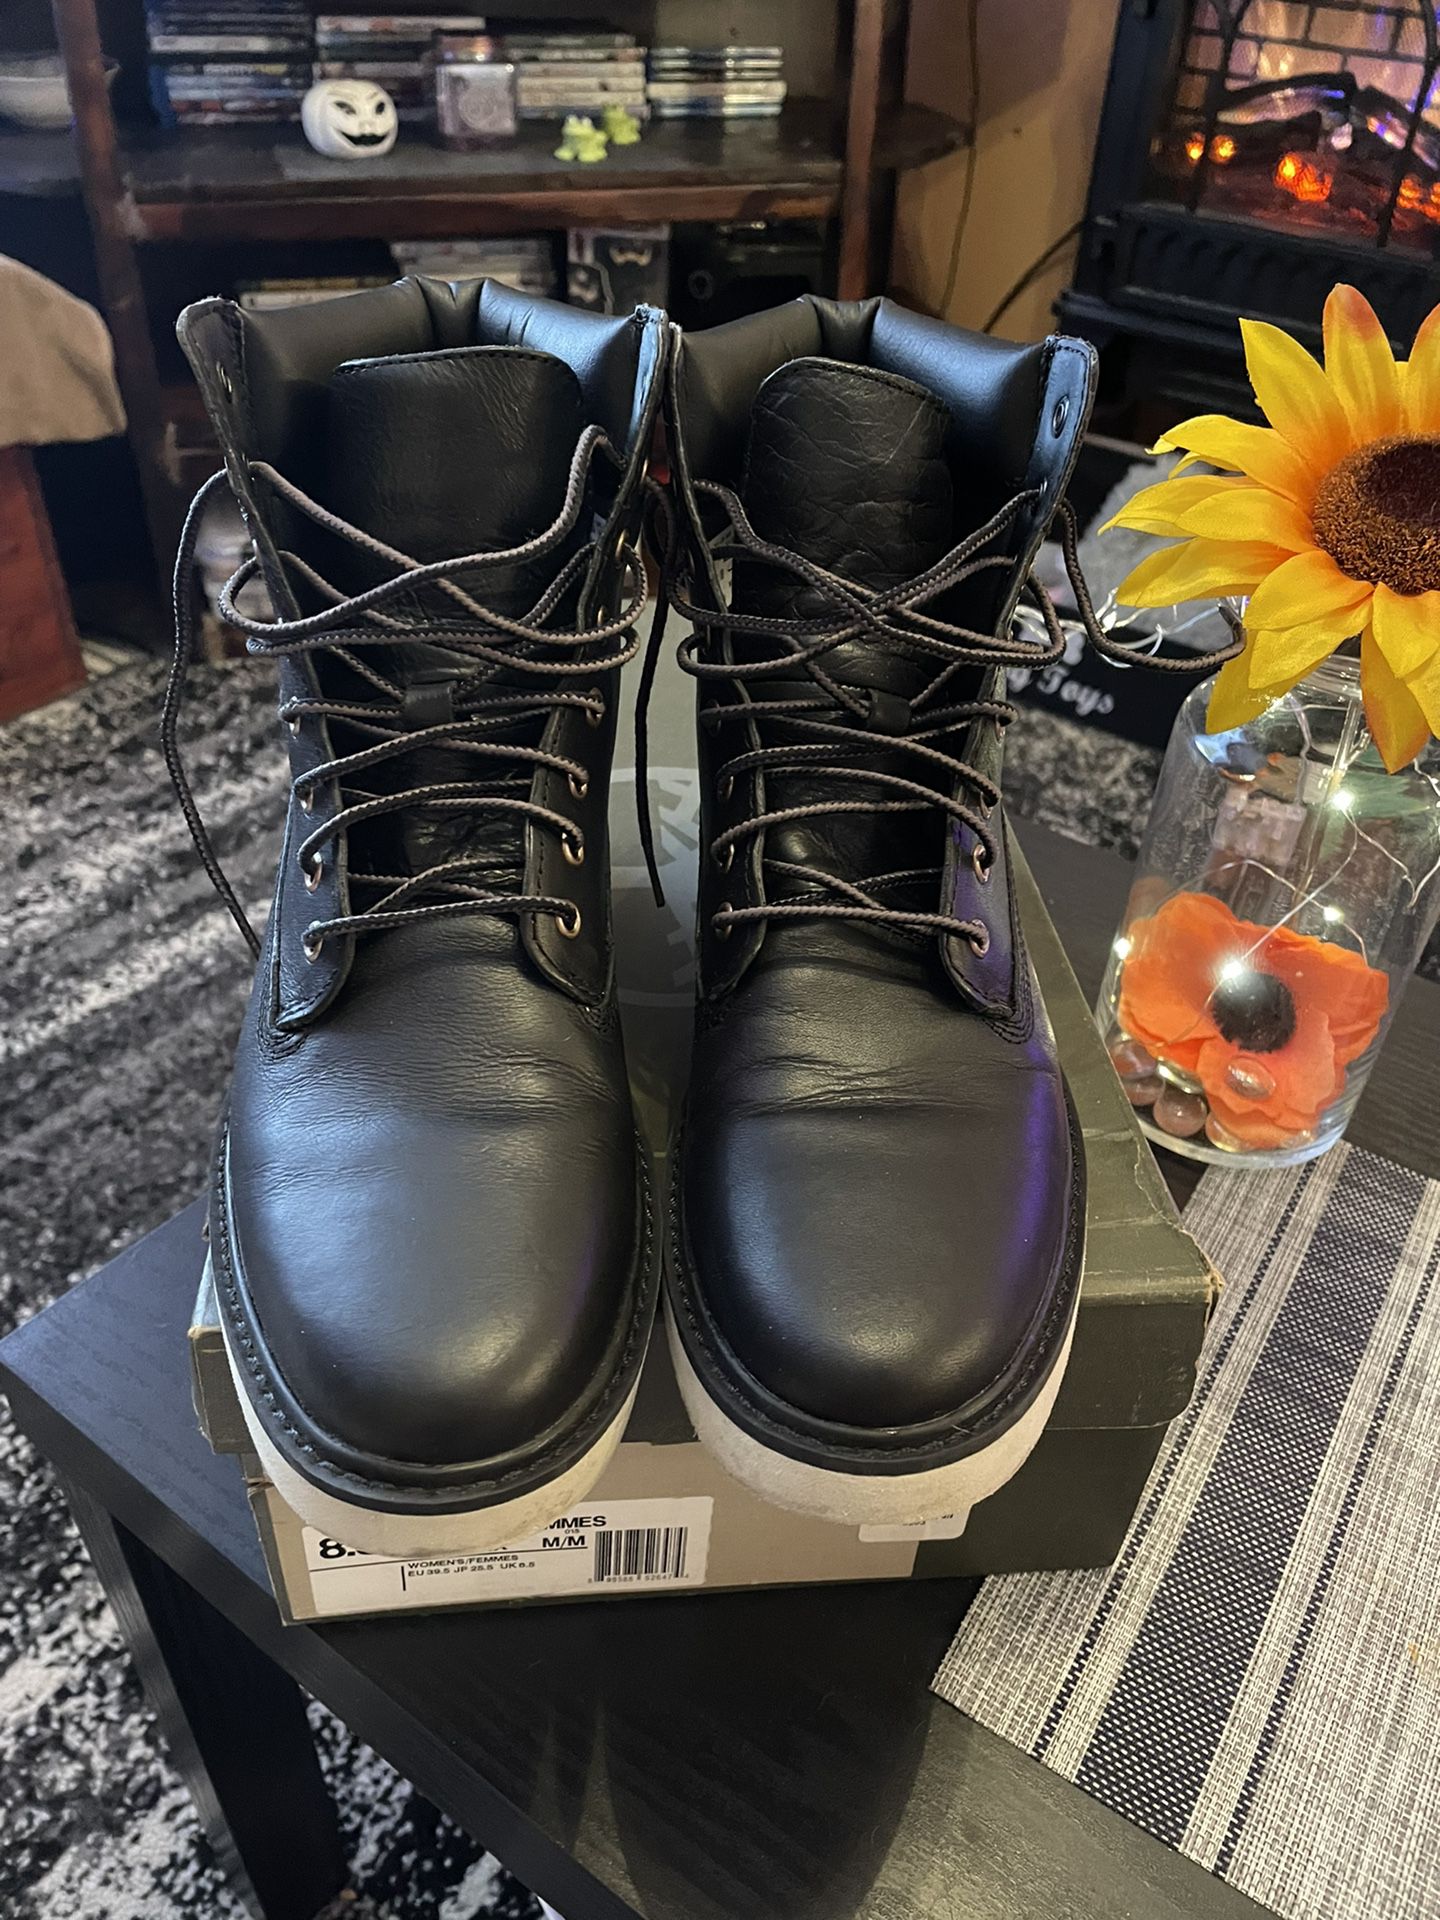 Timberland Woman’s Boots Size 8 1/2 